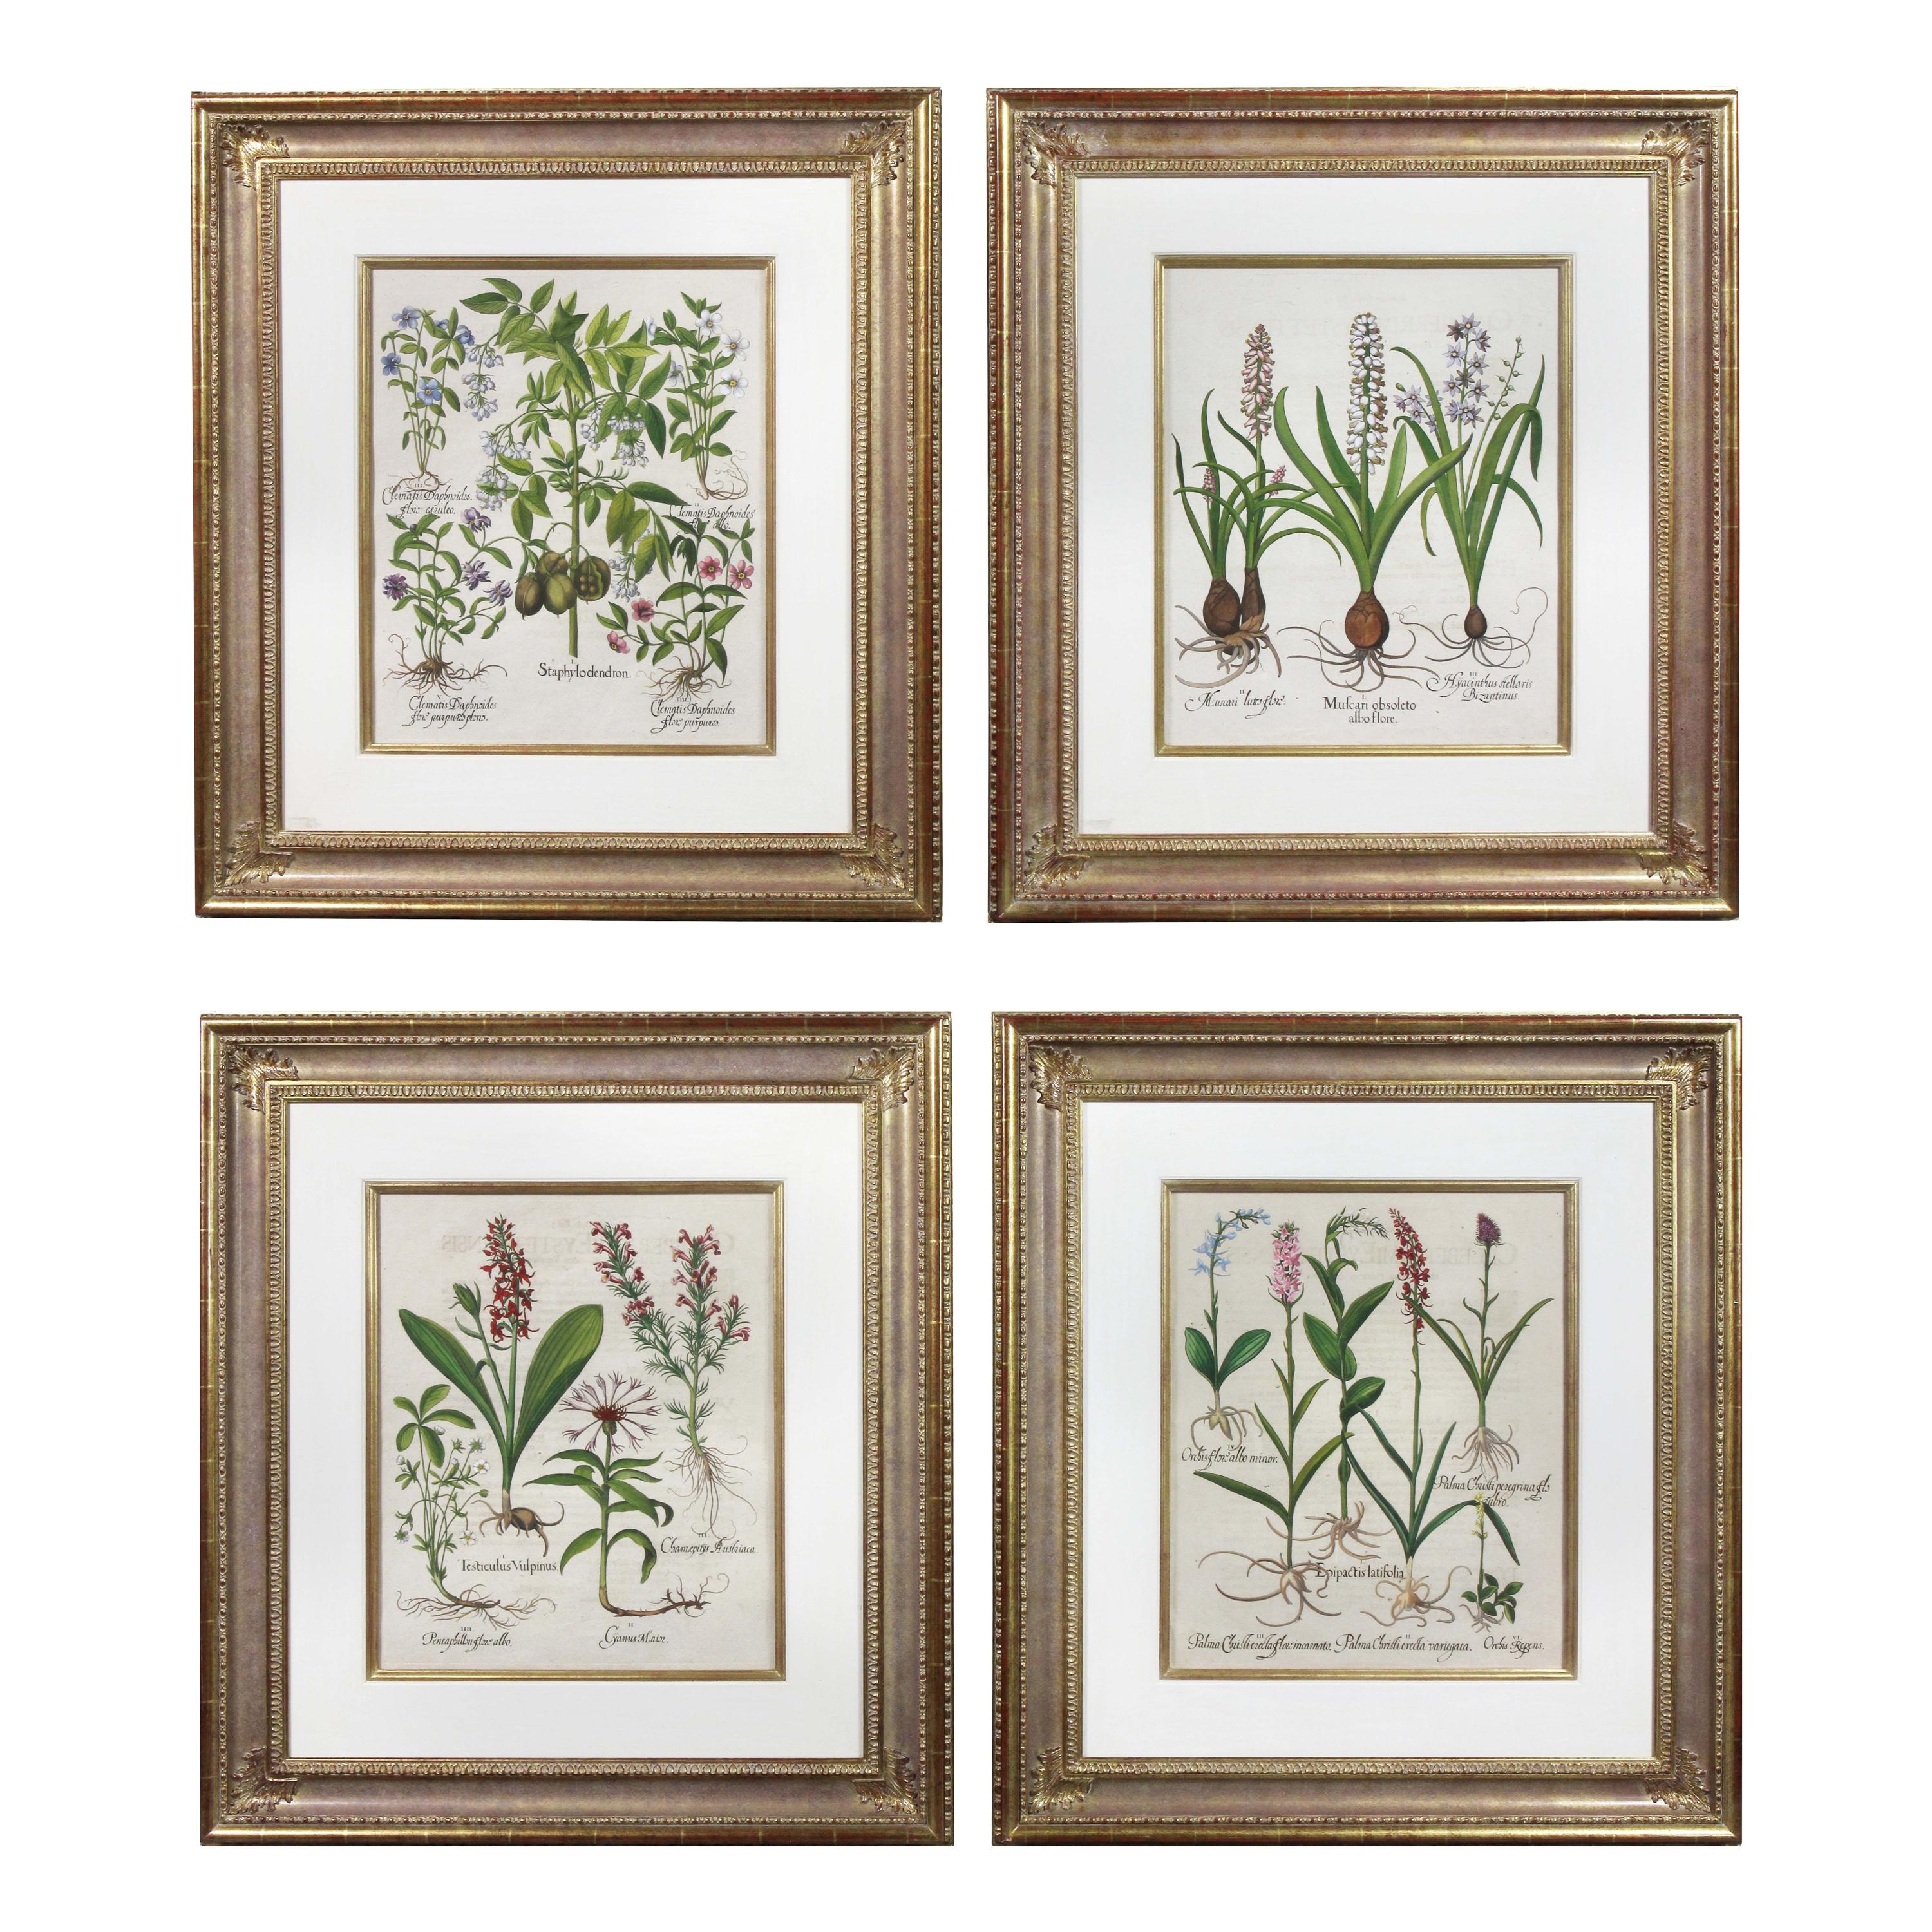 Four Framed Hand Colored Engravings by Basilius Besler